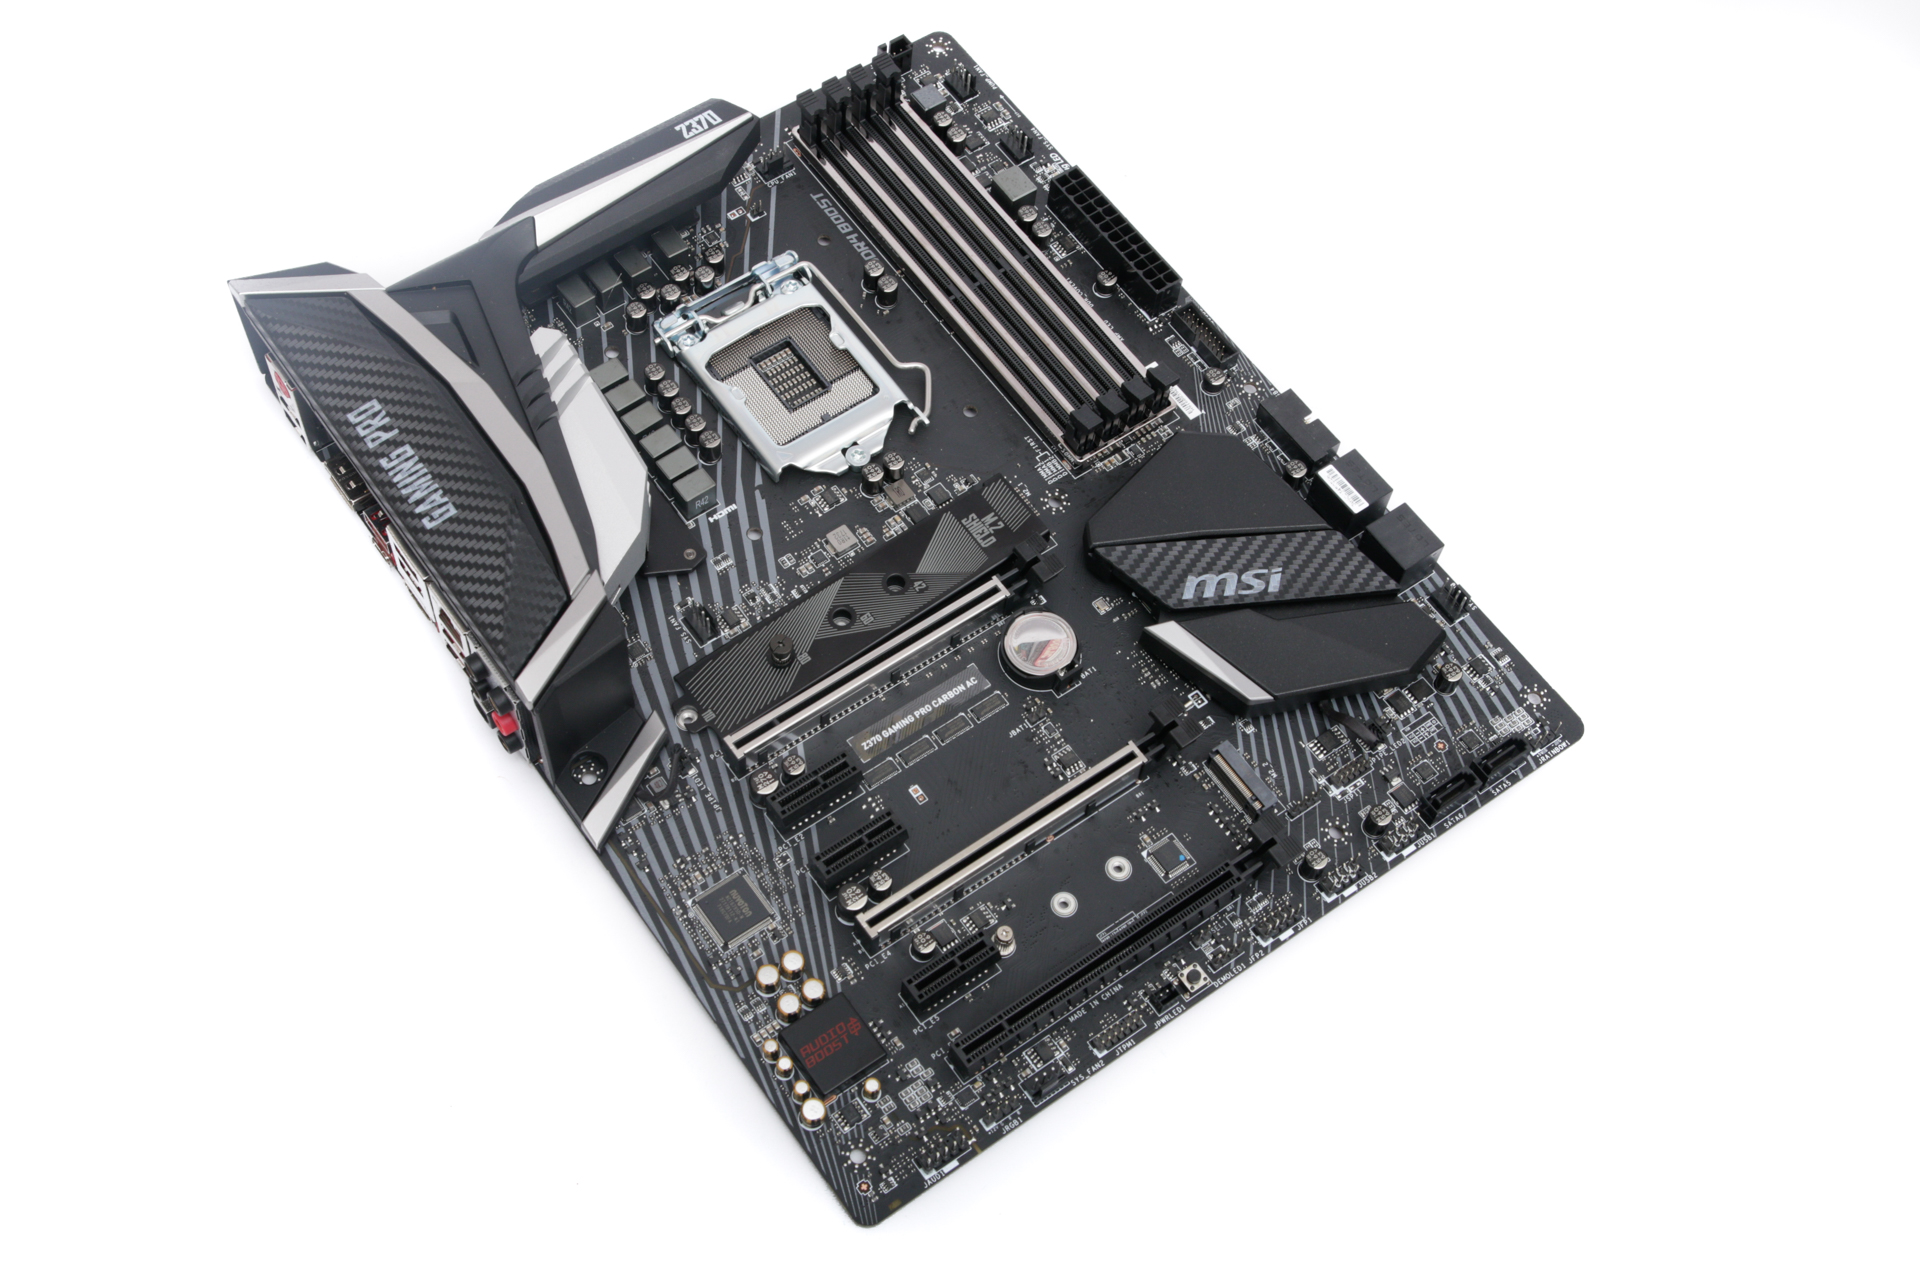 MSI Z370 Gaming Pro Carbon AC Motherboard Review